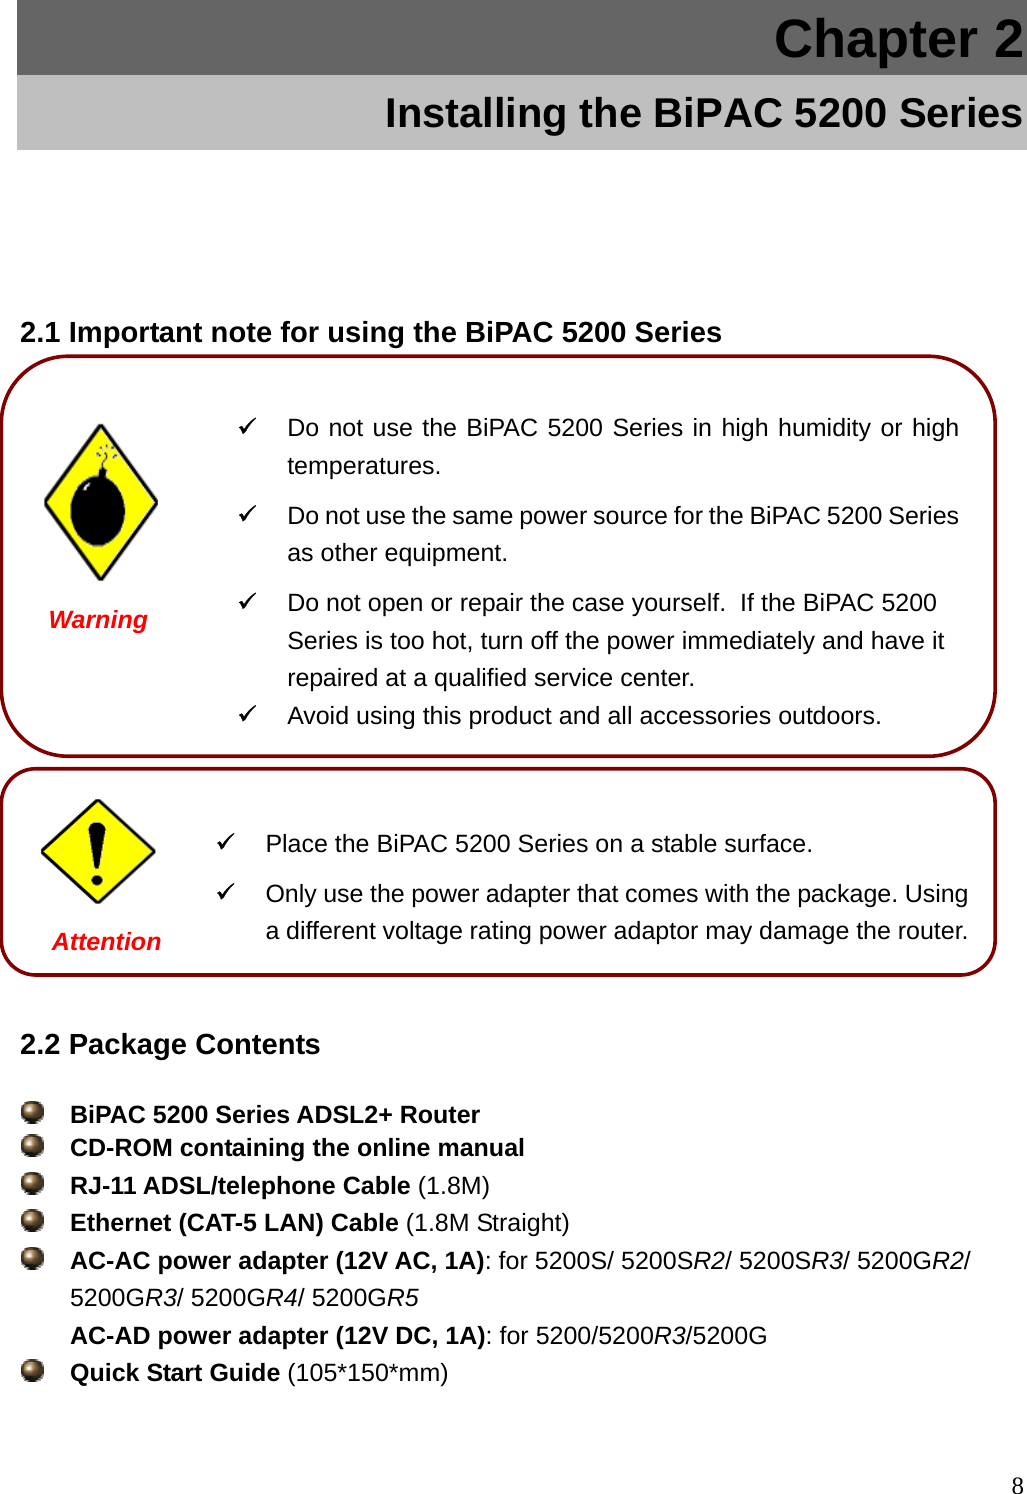 Chapter 2 Installing the BiPAC 5200 Series 2.1 Important note for using the BiPAC 5200 Series                 Warning   Do not use the BiPAC 5200 Series in high humidity or hightemperatures.   Do not use the same power source for the BiPAC 5200 Seriesas other equipment.   Do not open or repair the case yourself.  If the BiPAC 5200 Series is too hot, turn off the power immediately and have it repaired at a qualified service center.  Avoid using this product and all accessories outdoors. Attention  Place the BiPAC 5200 Series on a stable surface.   Only use the power adapter that comes with the package. Using a different voltage rating power adaptor may damage the router.2.2 Package Contents  BiPAC 5200 Series ADSL2+ Router     CD-ROM containing the online manual  RJ-11 ADSL/telephone Cable (1.8M)  Ethernet (CAT-5 LAN) Cable (1.8M Straight)  AC-AC power adapter (12V AC, 1A): for 5200S/ 5200SR2/ 5200SR3/ 5200GR2/ 5200GR3/ 5200GR4/ 5200GR5 AC-AD power adapter (12V DC, 1A): for 5200/5200R3/5200G  Quick Start Guide (105*150*mm)  8